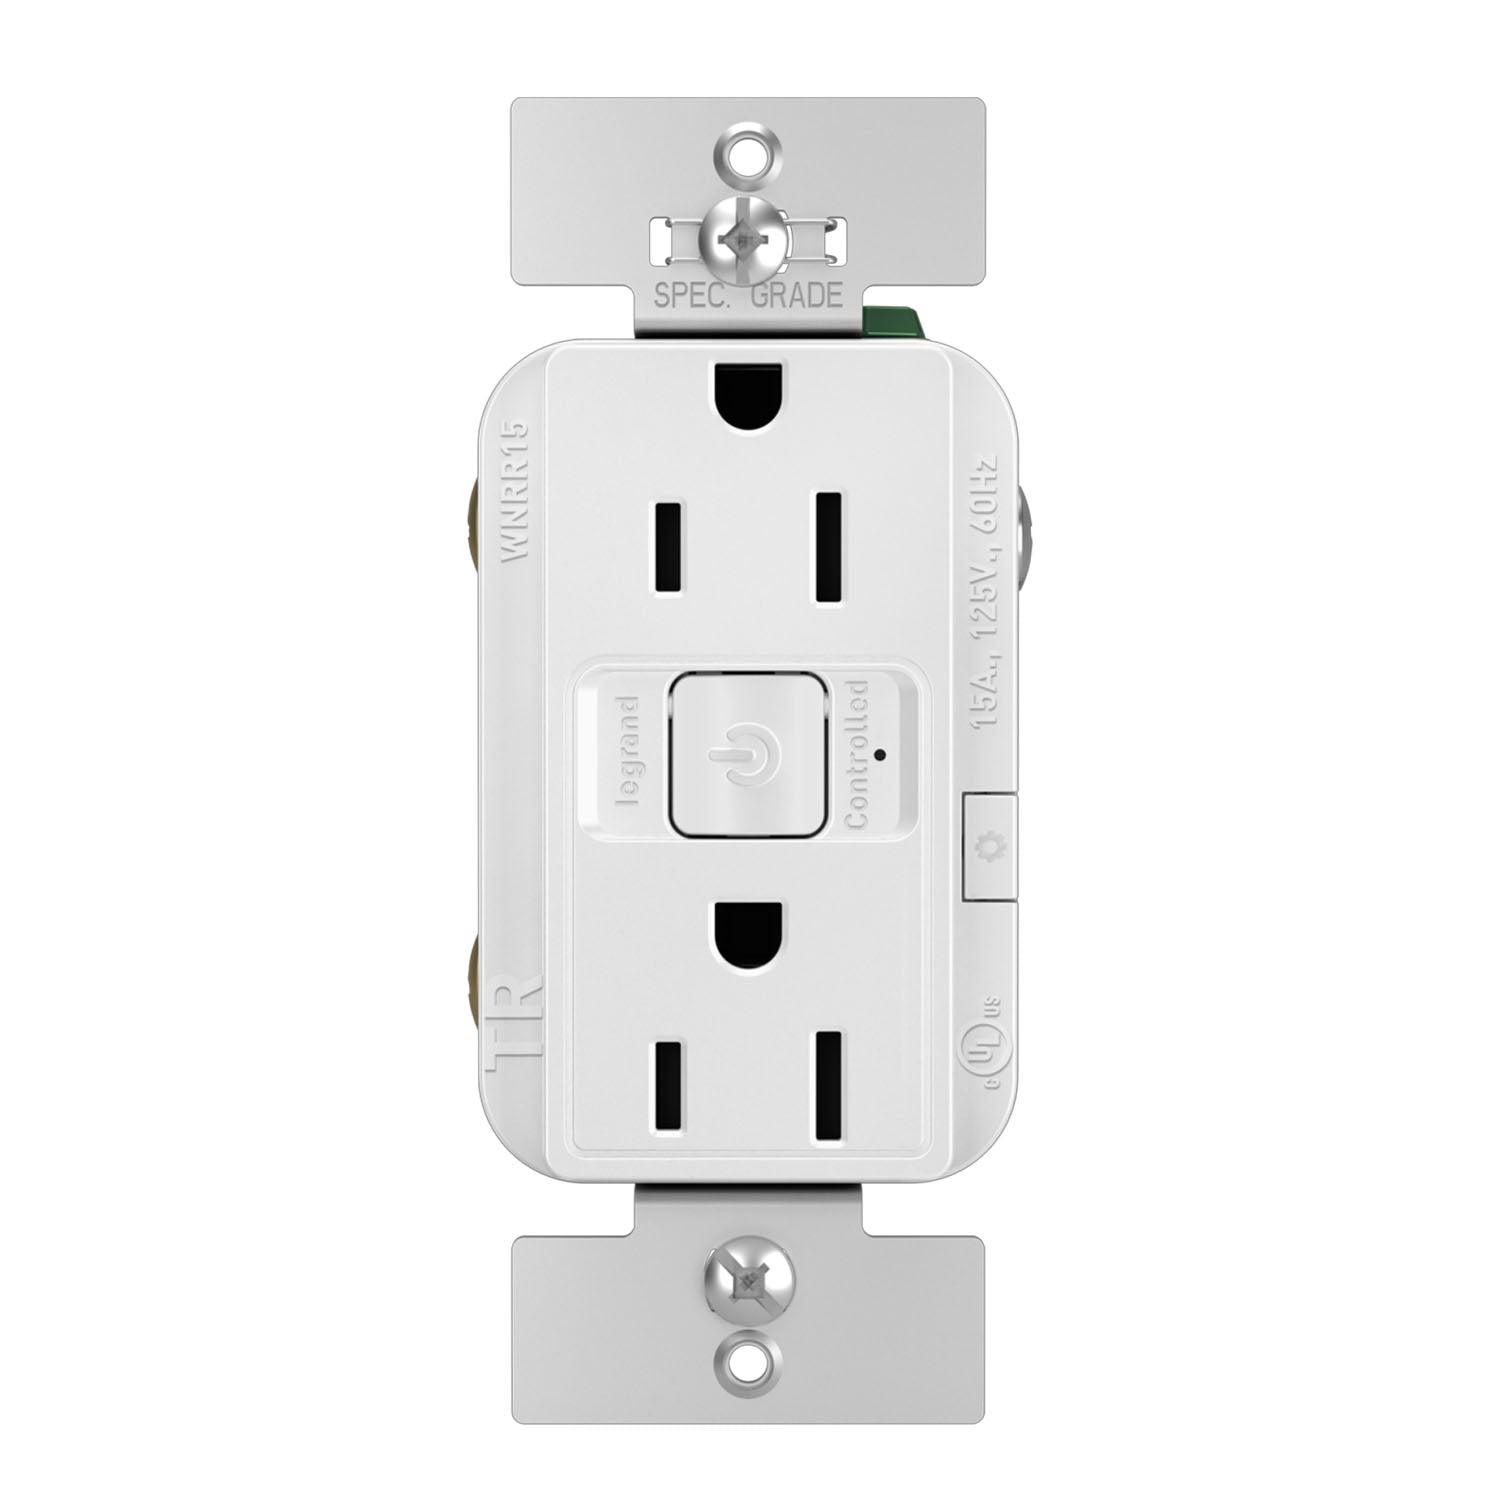 Radiant 15 Amp Smart Outlet with Netatmo White - Bees Lighting